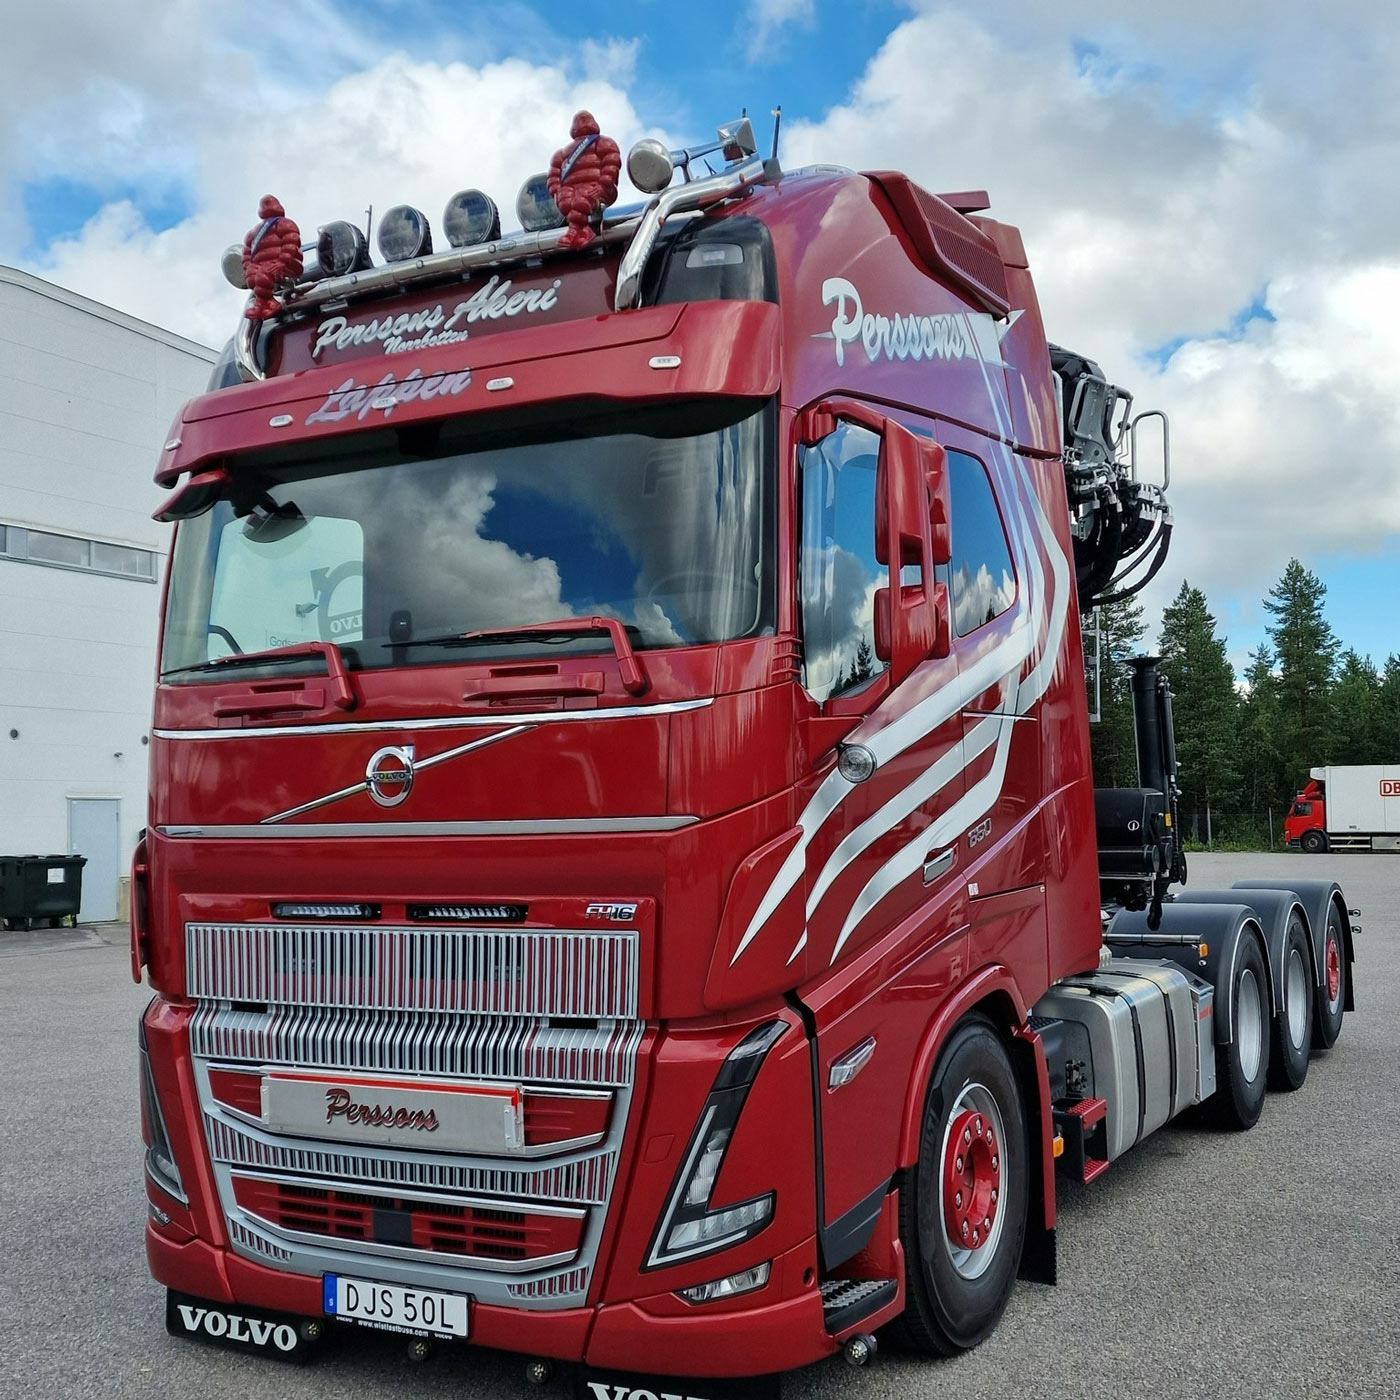 Sunvisor for Volvo FH/FM 4/5 and FMX With Lazer Linear 18 Elite 126W LED-bars with white pos.light